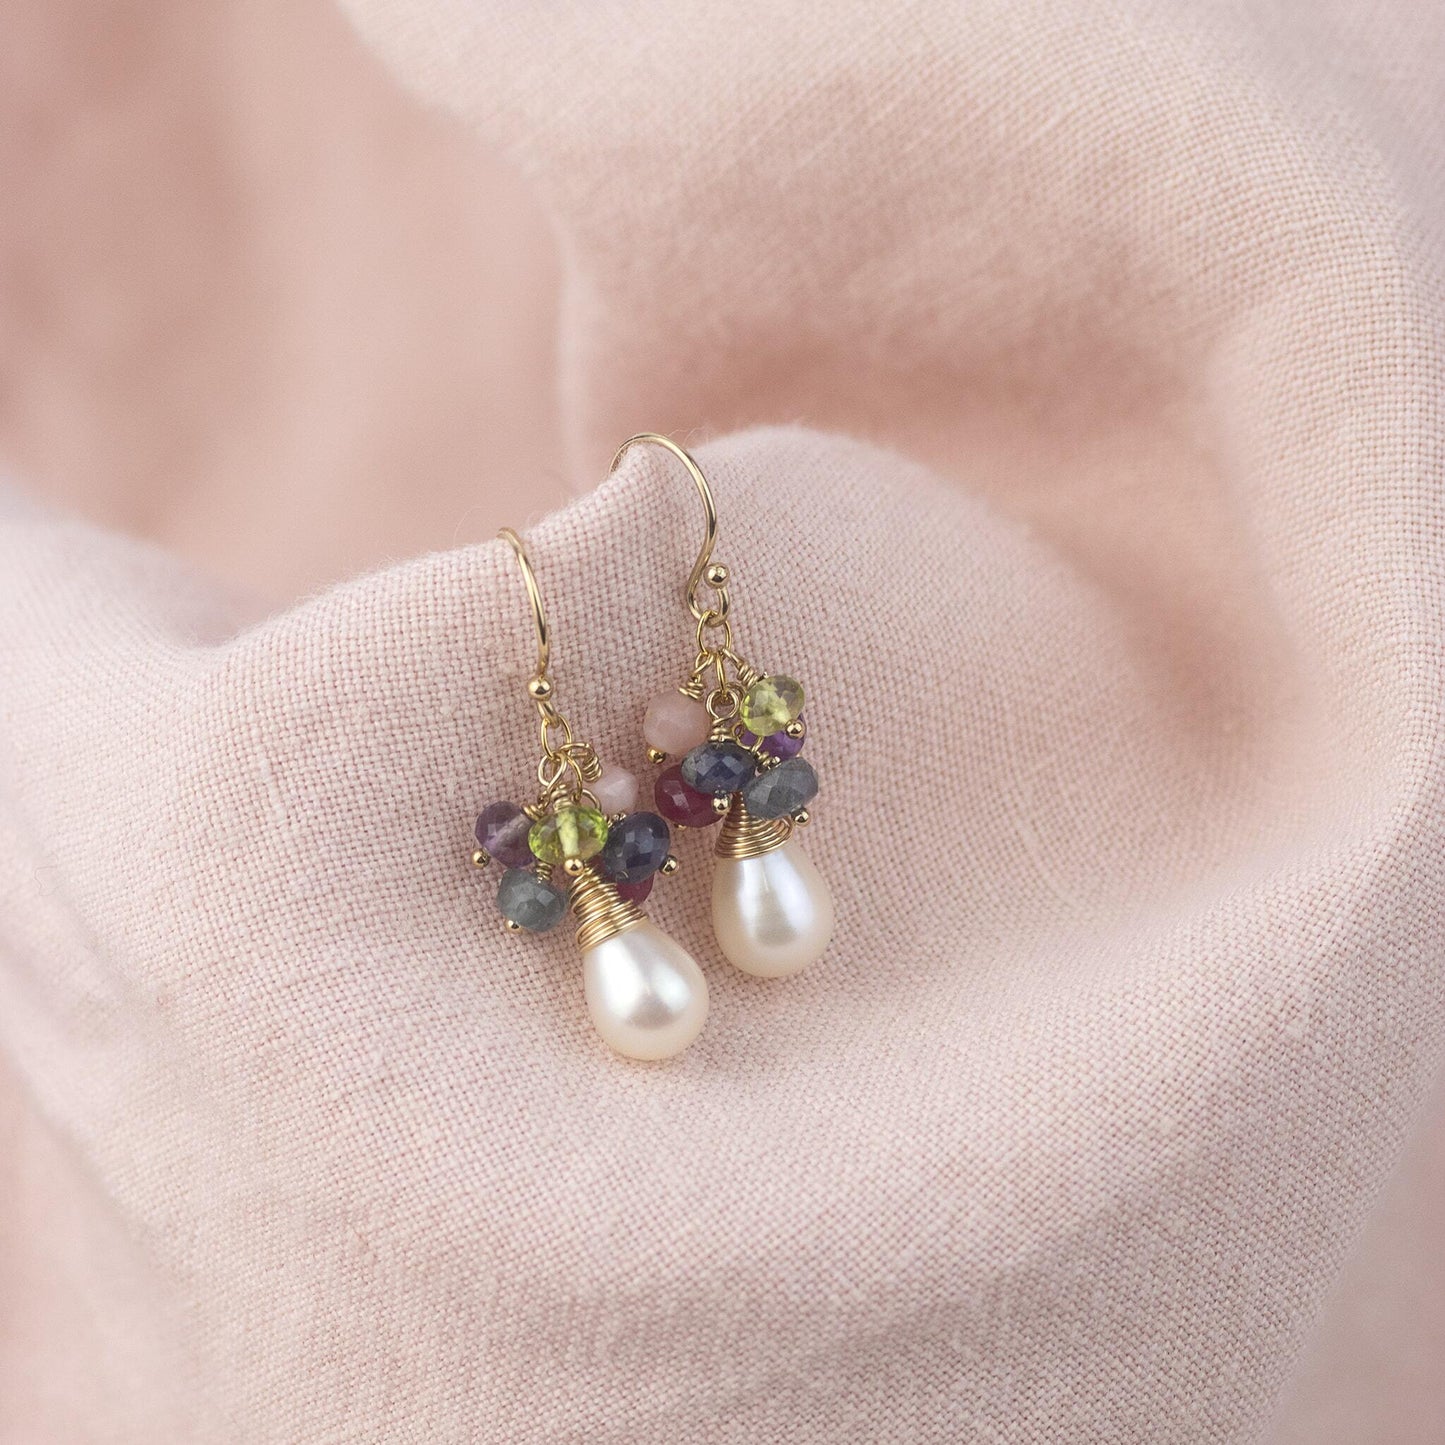 Family Birthstone Earrings with Freshwater Pearl - Birthstones for Loved Ones